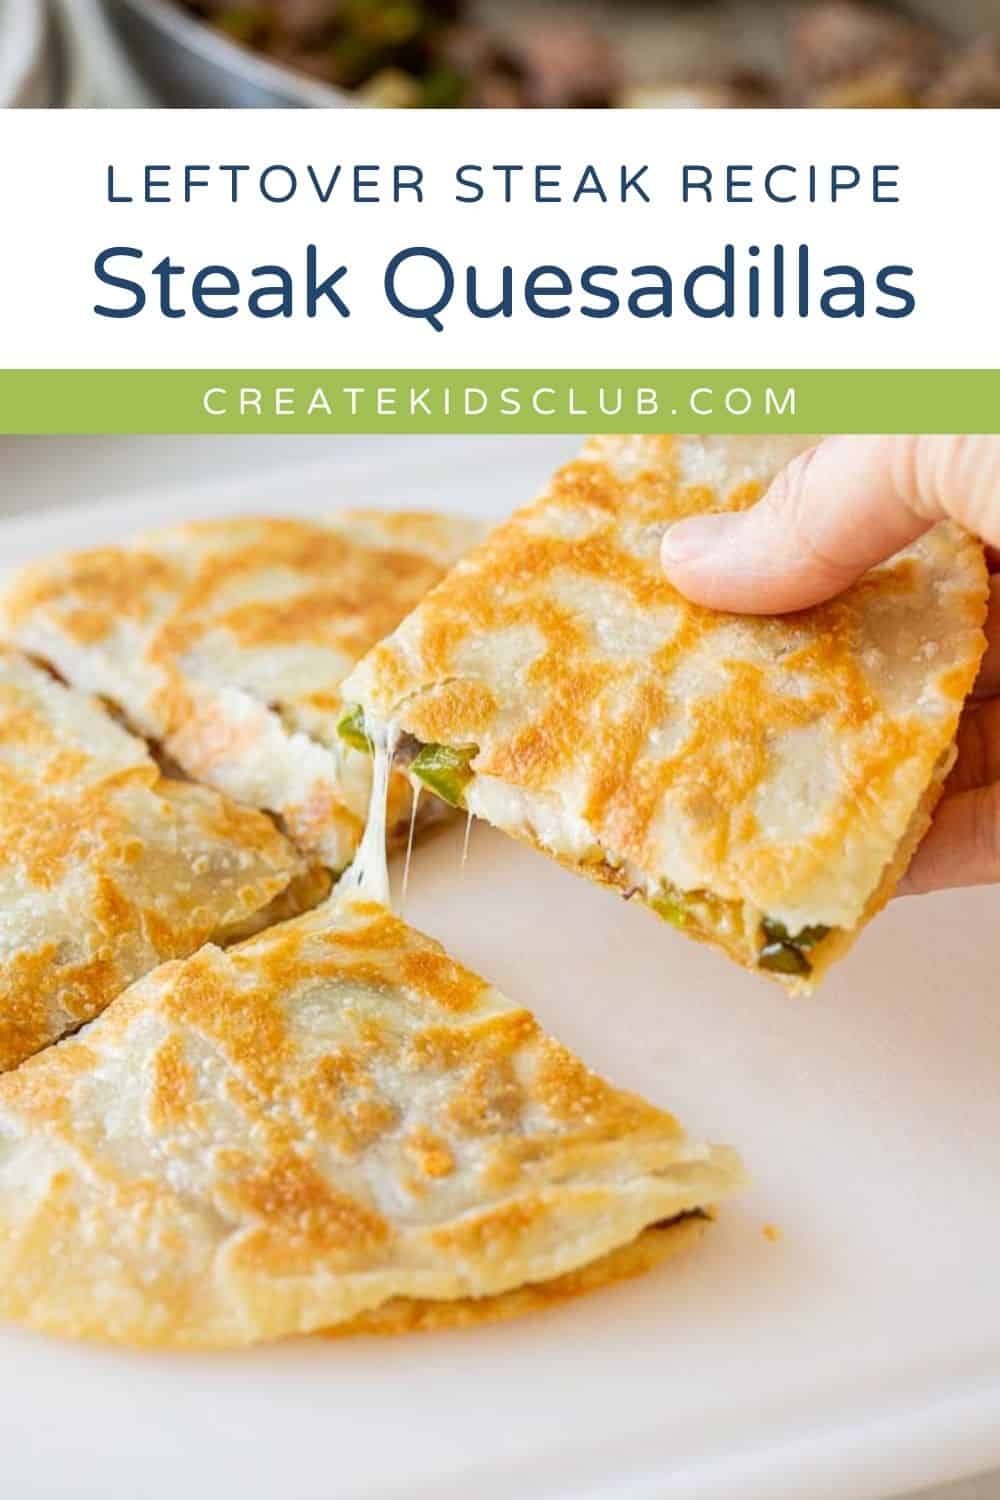 steak quesadilla wedges on a plate with a hand taking one pulling cheese